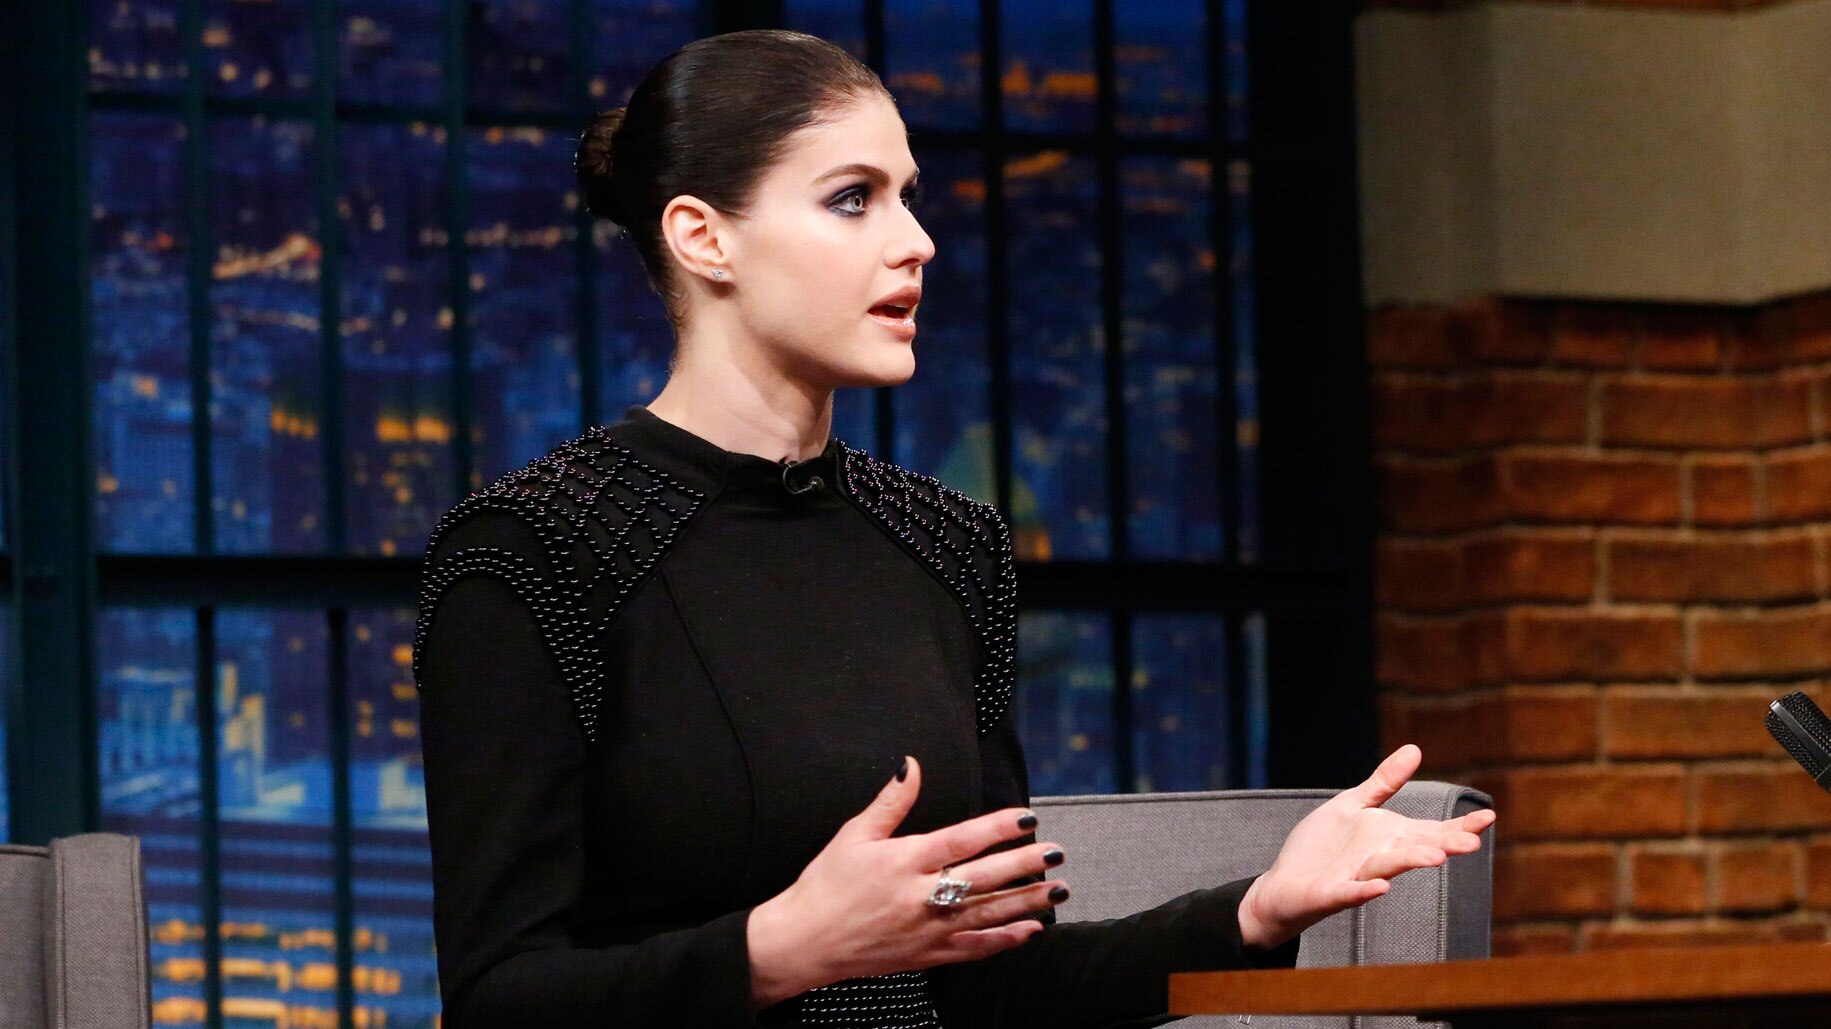 Alexandra Daddario Lesbian Porn - Watch Late Night with Seth Meyers Interview: Alexandra Daddario Auditioned  for Baywatch with Zac Efron in a Swimsuit - NBC.com